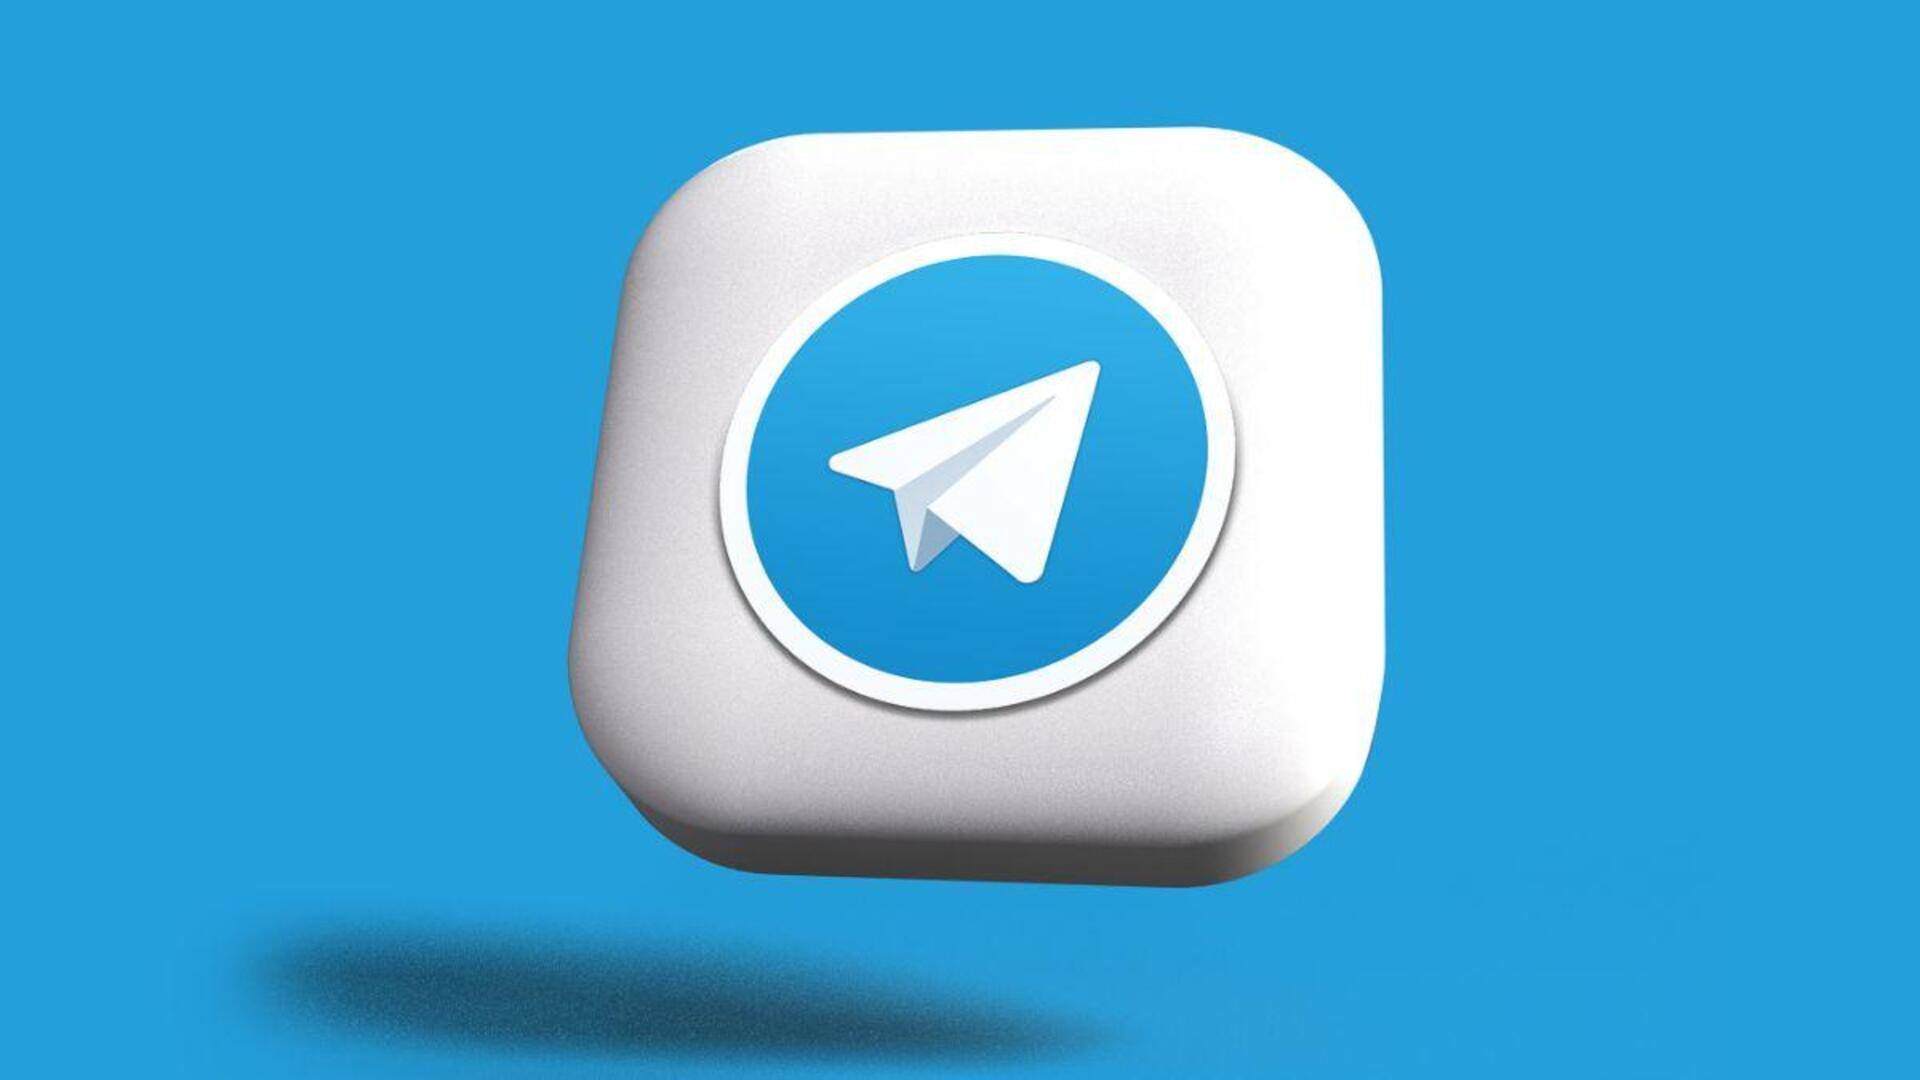 Telegram users can now convert personal accounts to business ones